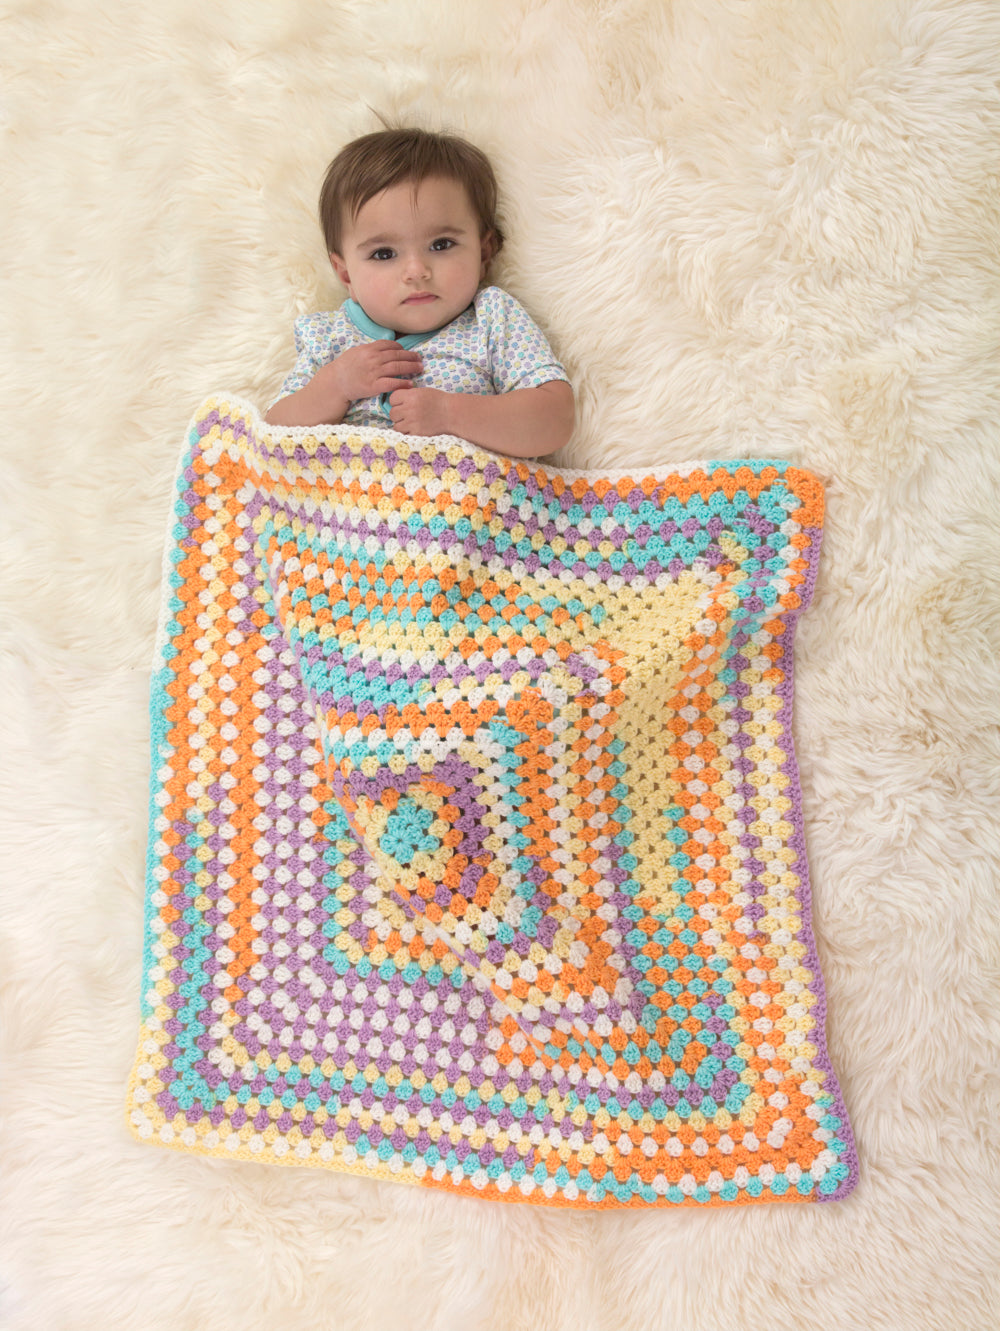 Knitting for Baby: 4 Easy Afghans from Lion Brand